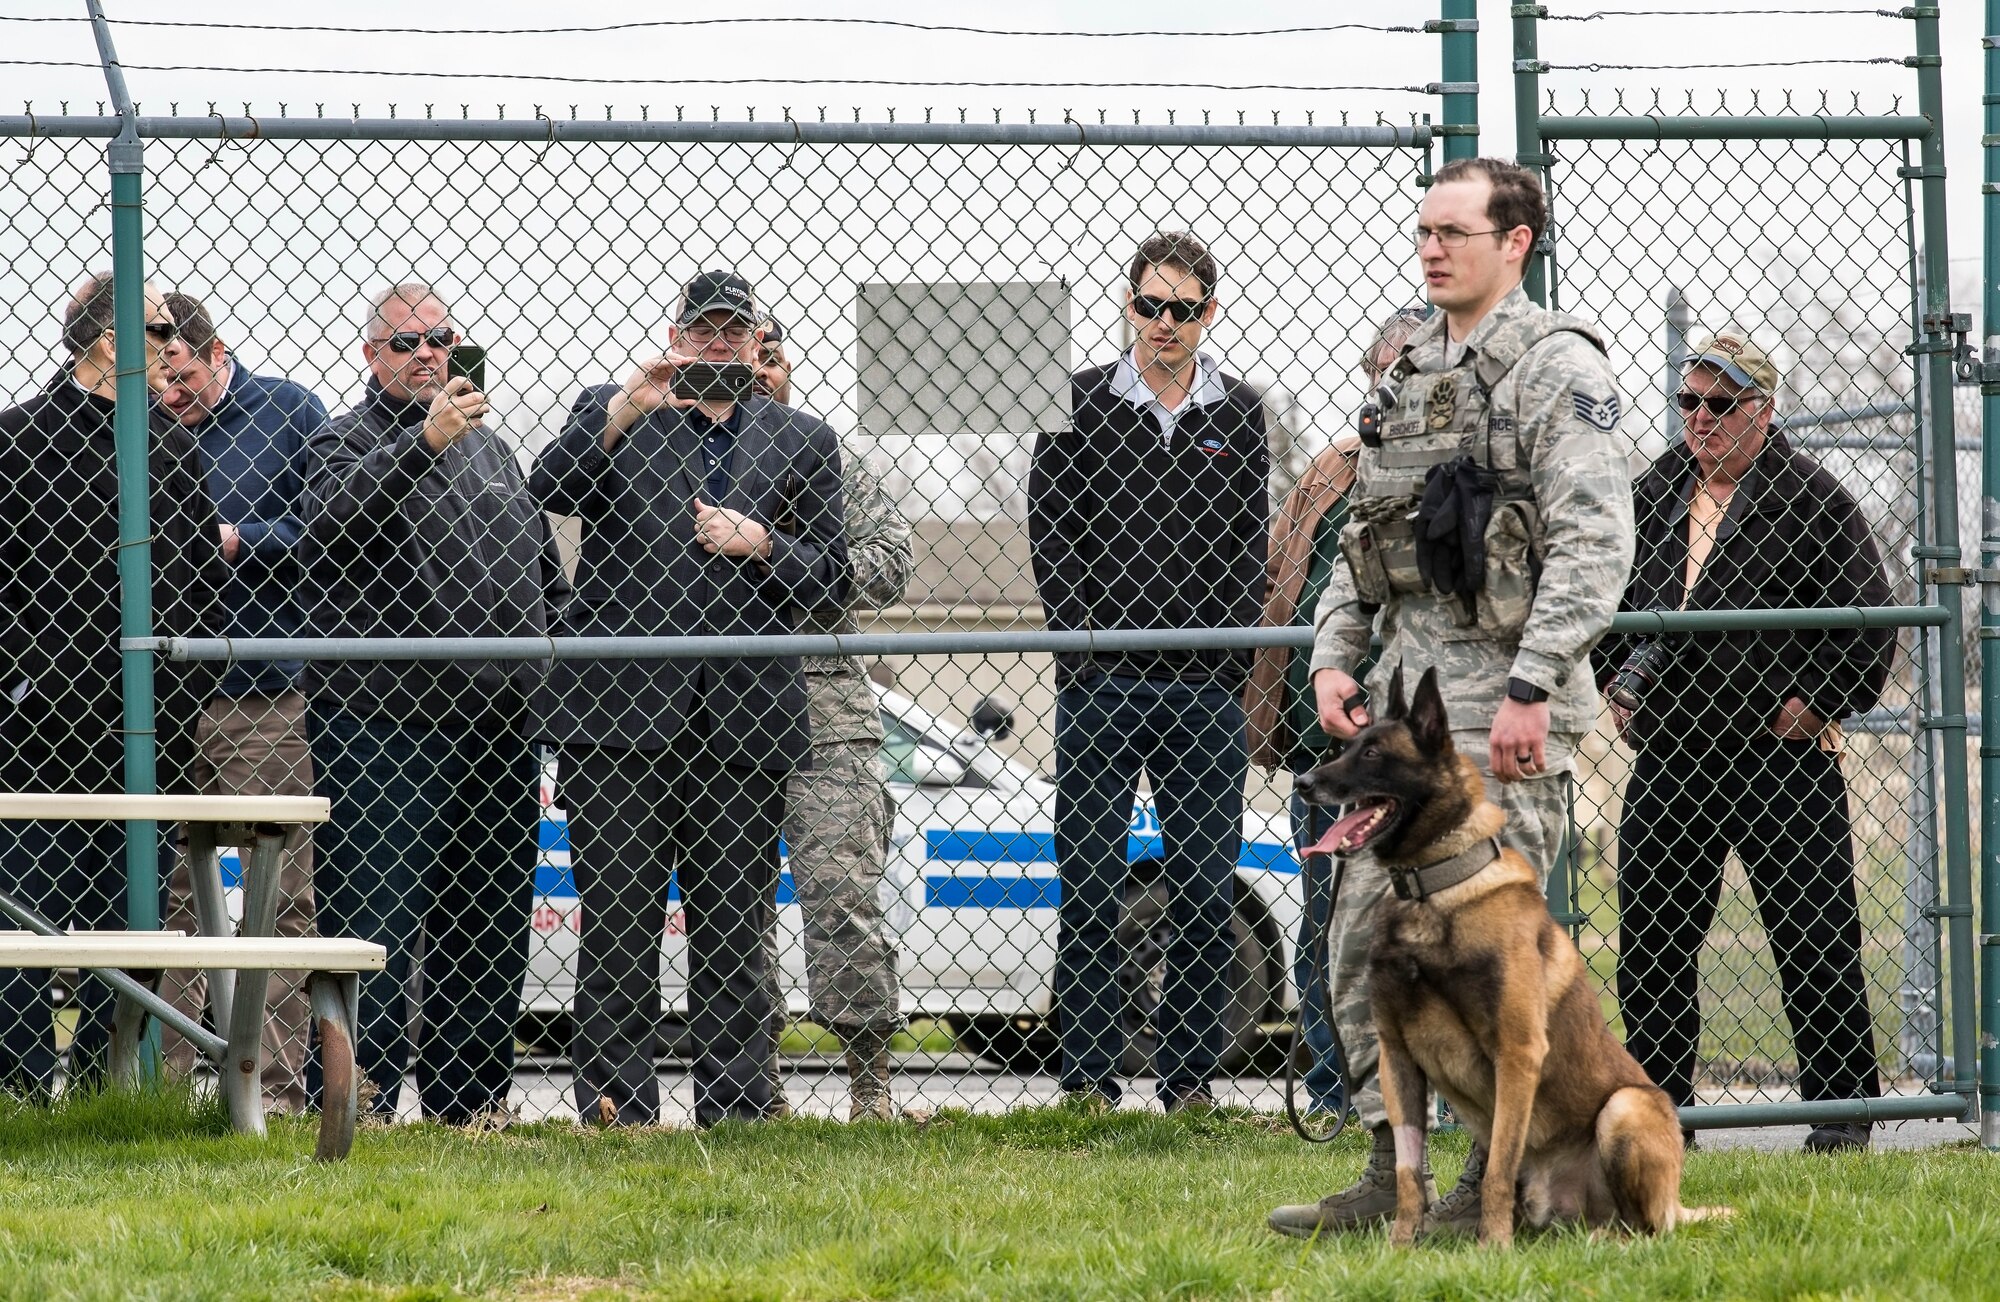 Karlo, a 436th Security Forces Squadron military working dog, sits next to Staff Sgt. David Bischoff, 436th SFS MWD handler during a training demonstration, April 11, 2018, at Dover Air Force Base, Del. Joey Logano, driver of the No. 22 Ford in the Monster Energy NASCAR Cup Series, watched Karlo, an 80-pound Belgian Malinois MWD, wait for the command to attack from Bischoff. (U.S. Air Force photo by Roland Balik)